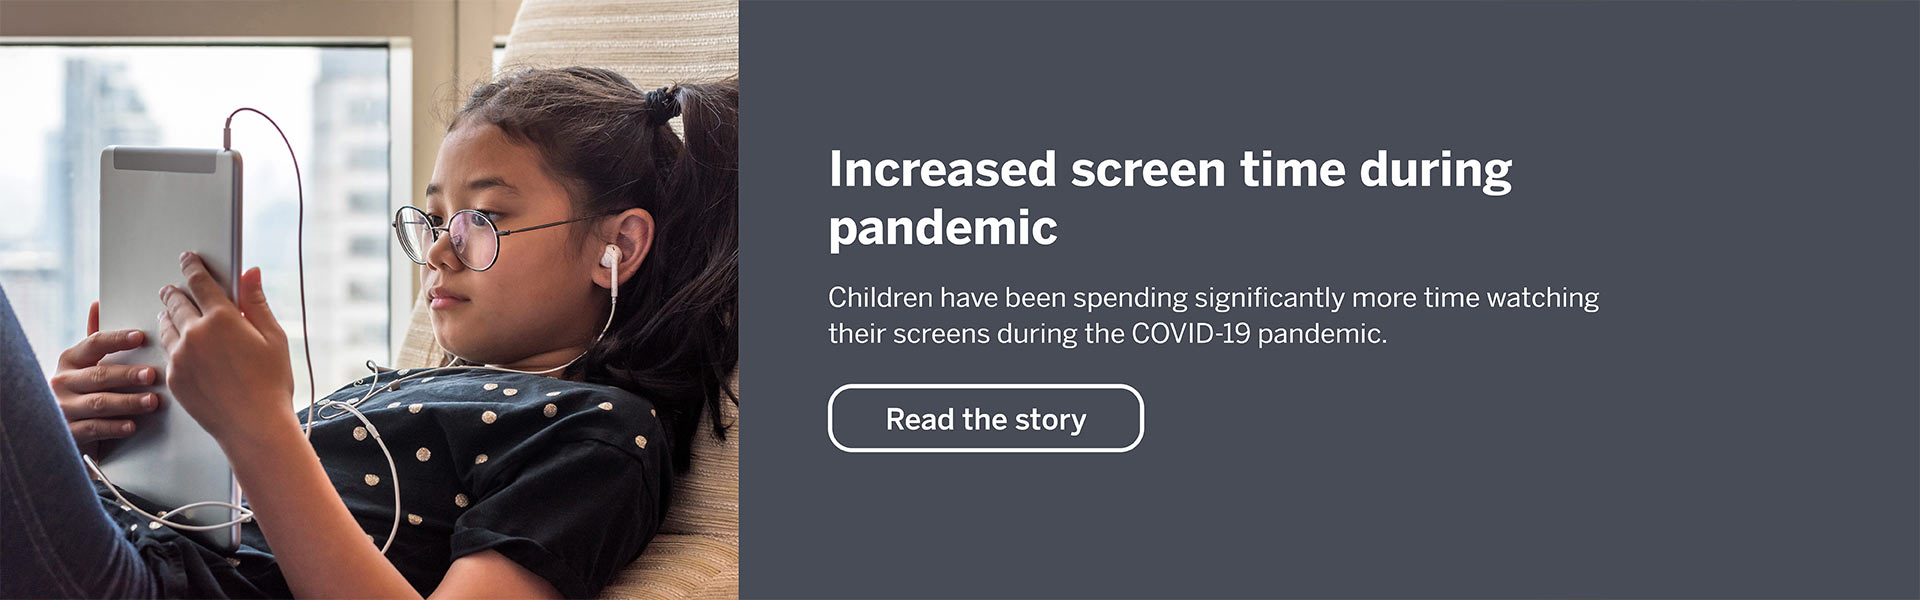 Increased screen time durin pandemic. Children have been spending significantly more time watching their screens during the covid-19 pandemic. Read the story